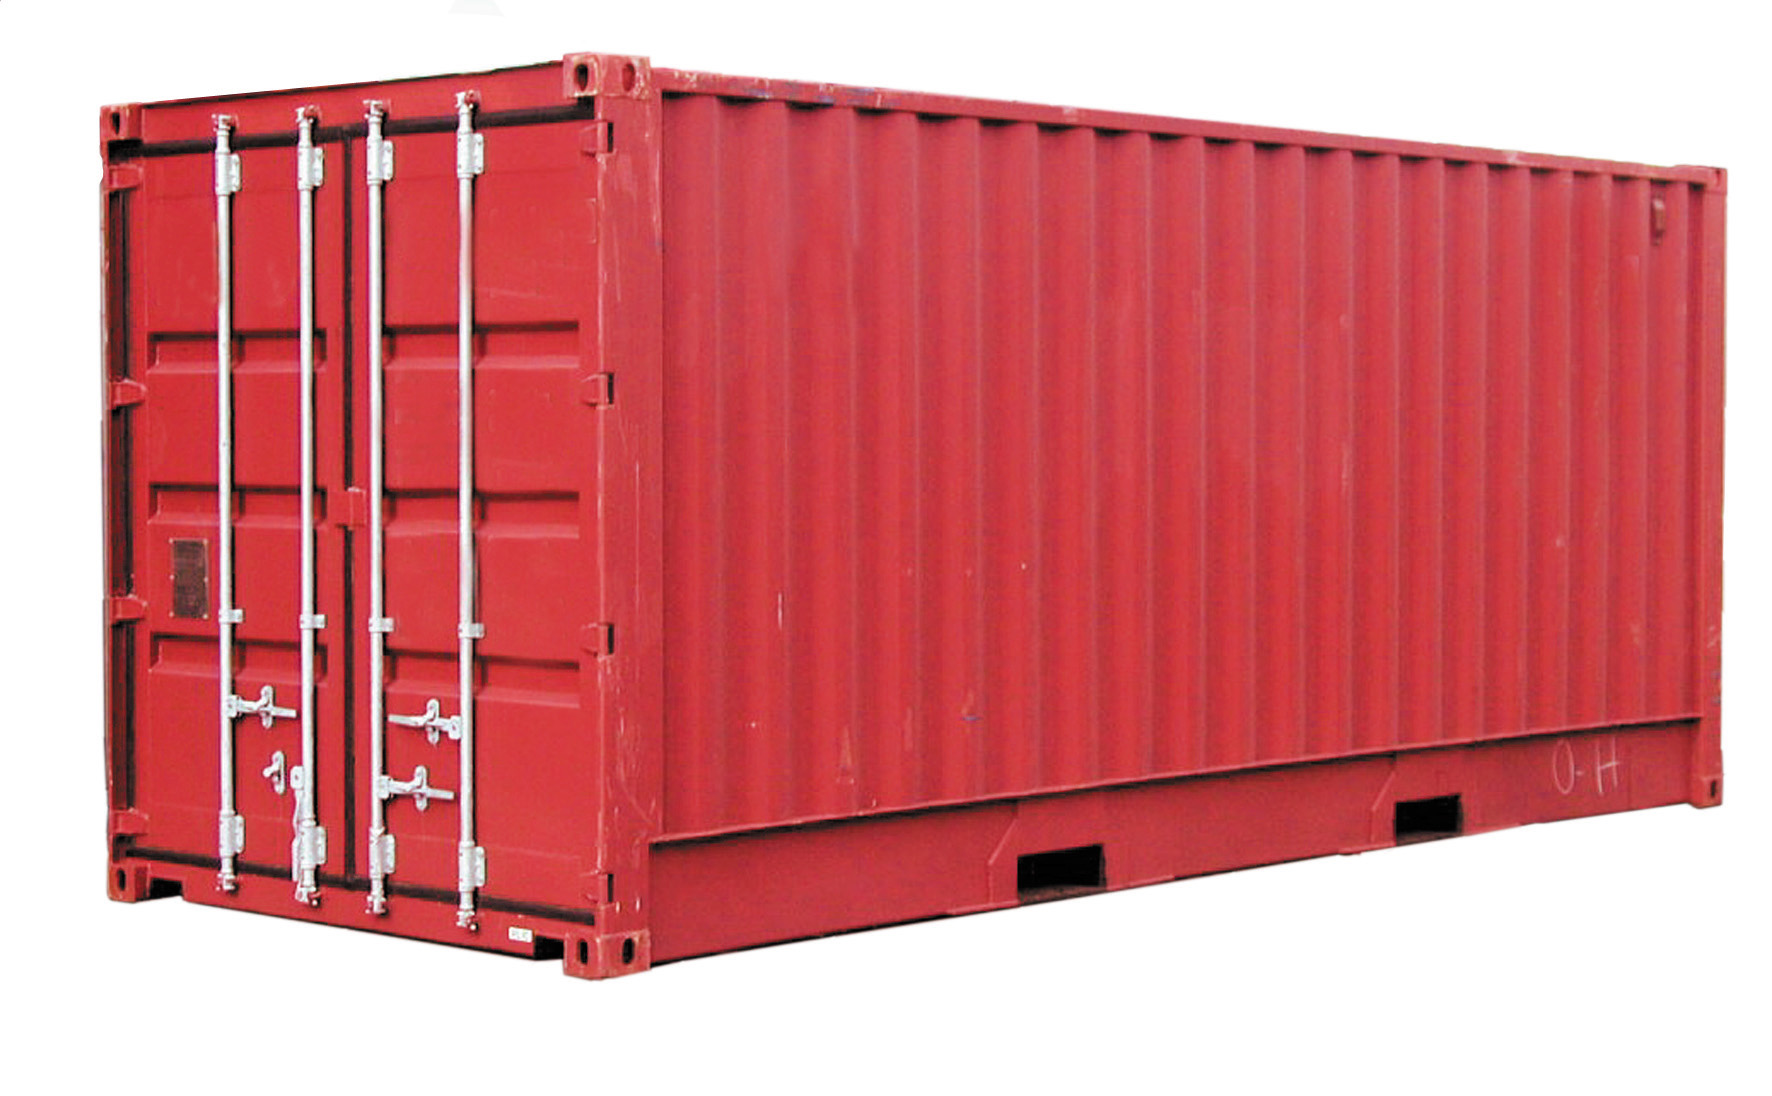 Shipping the full container  to Oman